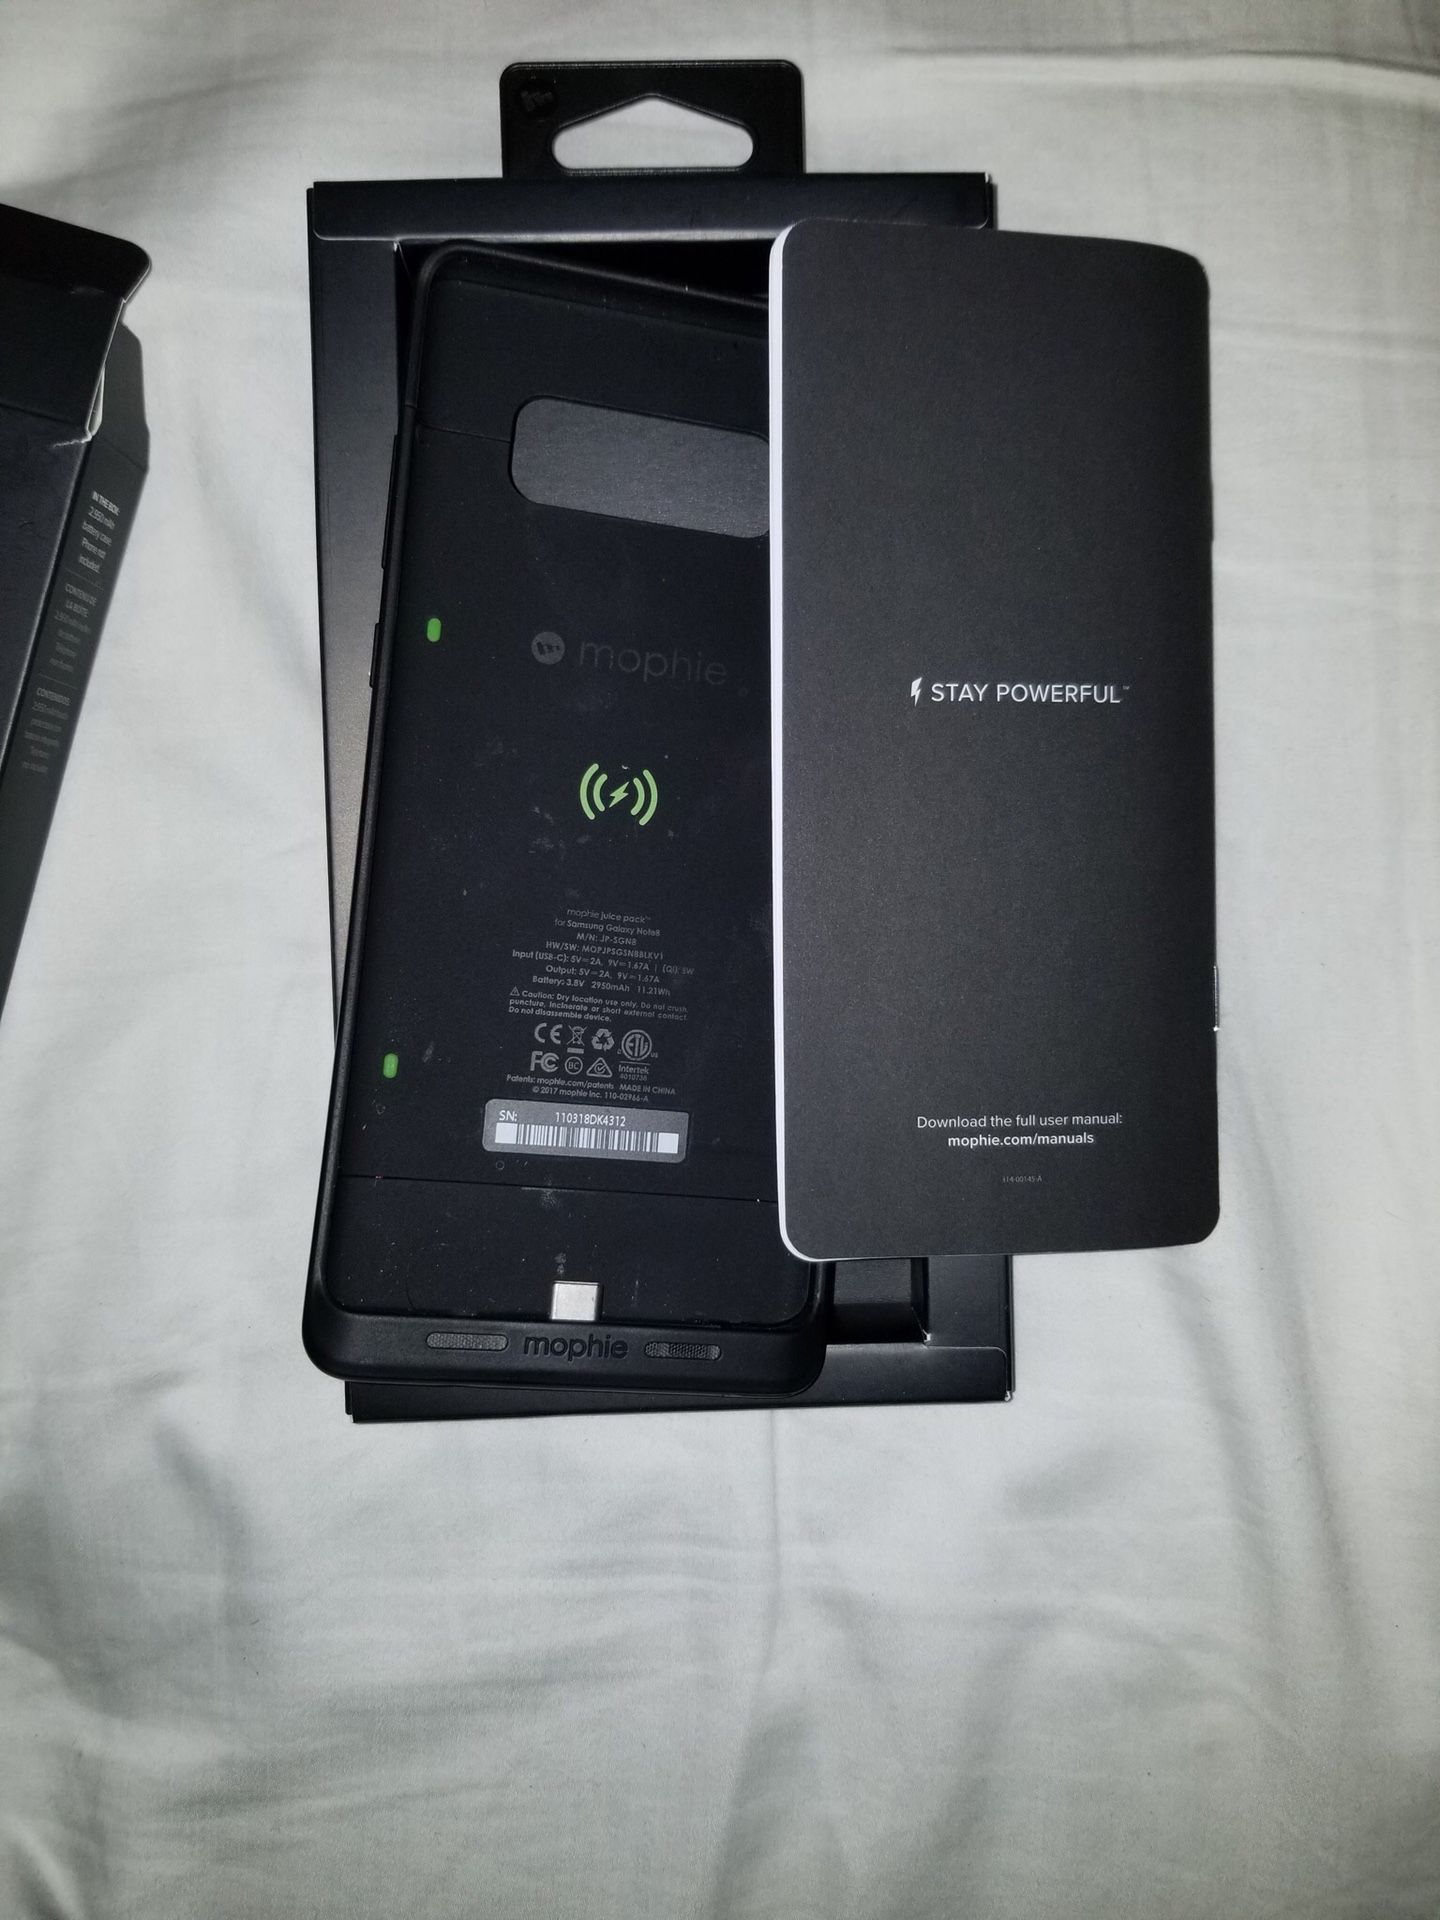 Mophie juice pack and charge force vent mount for samsung galaxy note 8. Used only for couple times